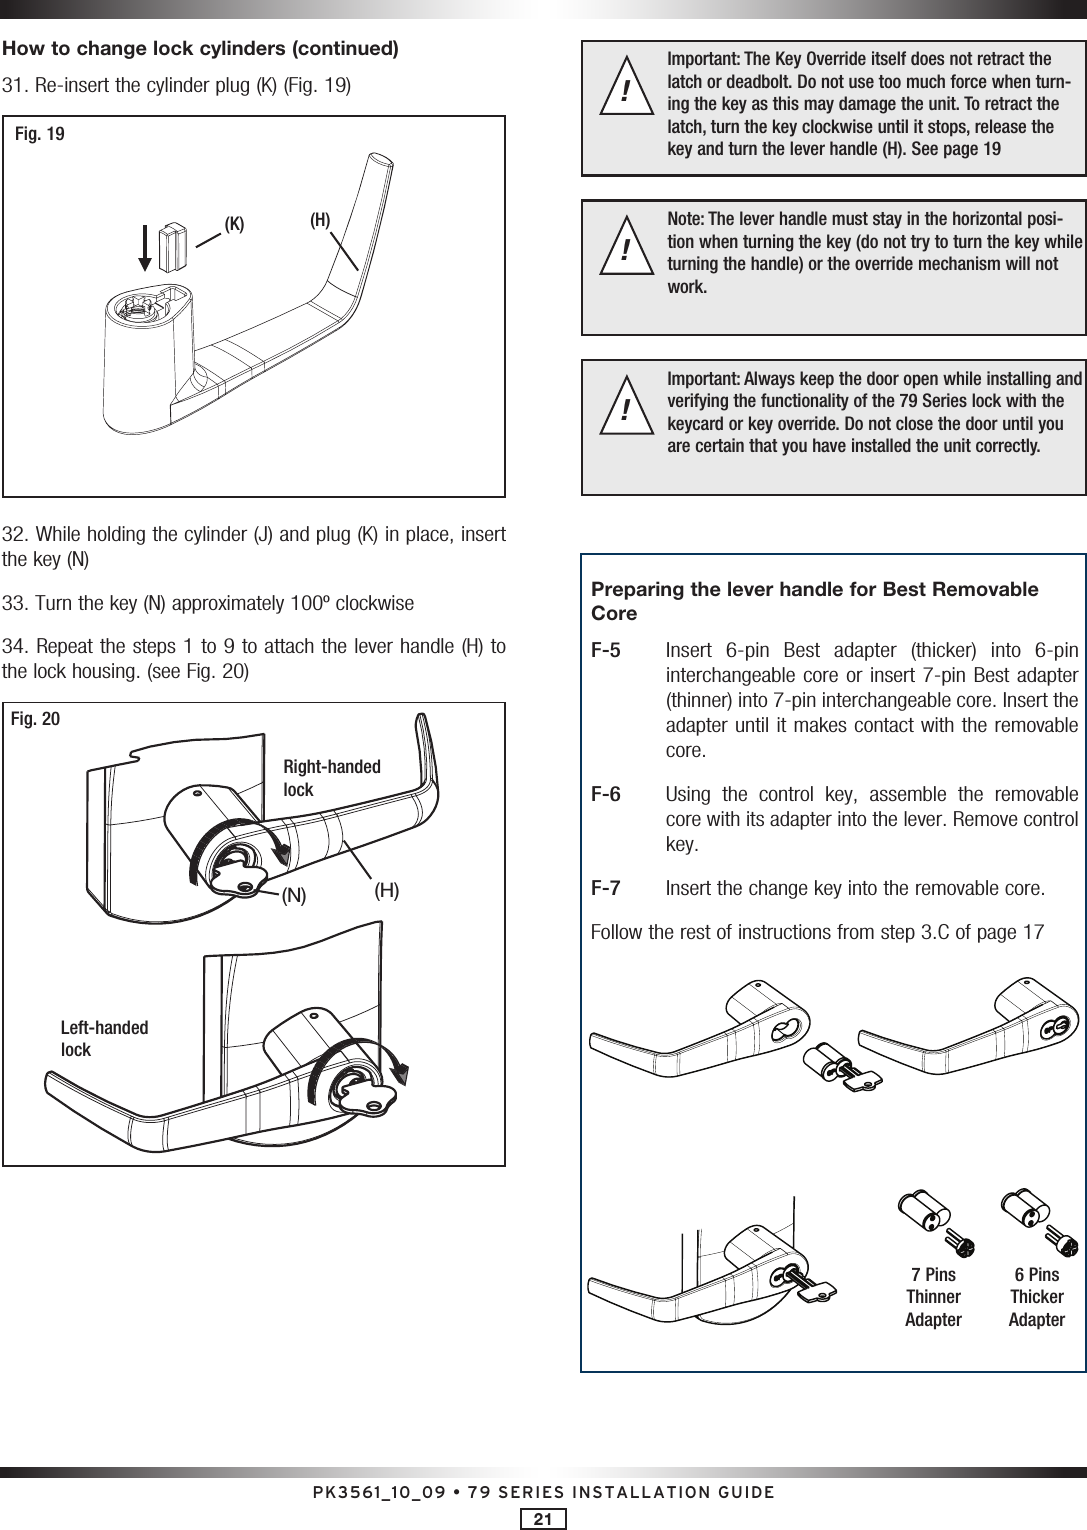 PK3561_10_09 • 79 SERIES INSTALLATION GUIDE21How to change lock cylinders (continued)31. Re-insert the cylinder plug (K) (Fig. 19)Fig. 19(H)(K)32. While holding the cylinder (J) and plug (K) in place, insert the key (N)33. Turn the key (N) approximately 100º clockwise34. Repeat the steps 1 to 9 to attach the lever handle (H) to the lock housing. (see Fig. 20)Fig. 20Right-handed lockLeft-handed lock(H)(N)Important: The Key Override itself does not retract the latch or deadbolt. Do not use too much force when turn-ing the key as this may damage the unit. To retract the latch, turn the key clockwise until it stops, release the  key and turn the lever handle (H). See page 19!Note: The lever handle must stay in the horizontal posi-tion when turning the key (do not try to turn the key while turning the handle) or the override mechanism will not work.!Important: Always keep the door open while installing and verifying the functionality of the 79 Series lock with the  keycard or key override. Do not close the door until you are certain that you have installed the unit correctly.!Preparing the lever handle for Best Removable CoreF-5   Insert  6-pin  Best  adapter  (thicker)  into  6-pin interchangeable core or insert 7-pin Best adapter (thinner) into 7-pin interchangeable core. Insert the adapter until it makes contact with the removable core.F-6   Using  the  control  key,  assemble  the  removable core with its adapter into the lever. Remove control key.F-7   Insert the change key into the removable core.Follow the rest of instructions from step 3.C of page 177 Pins Thinner Adapter6 Pins Thicker Adapter